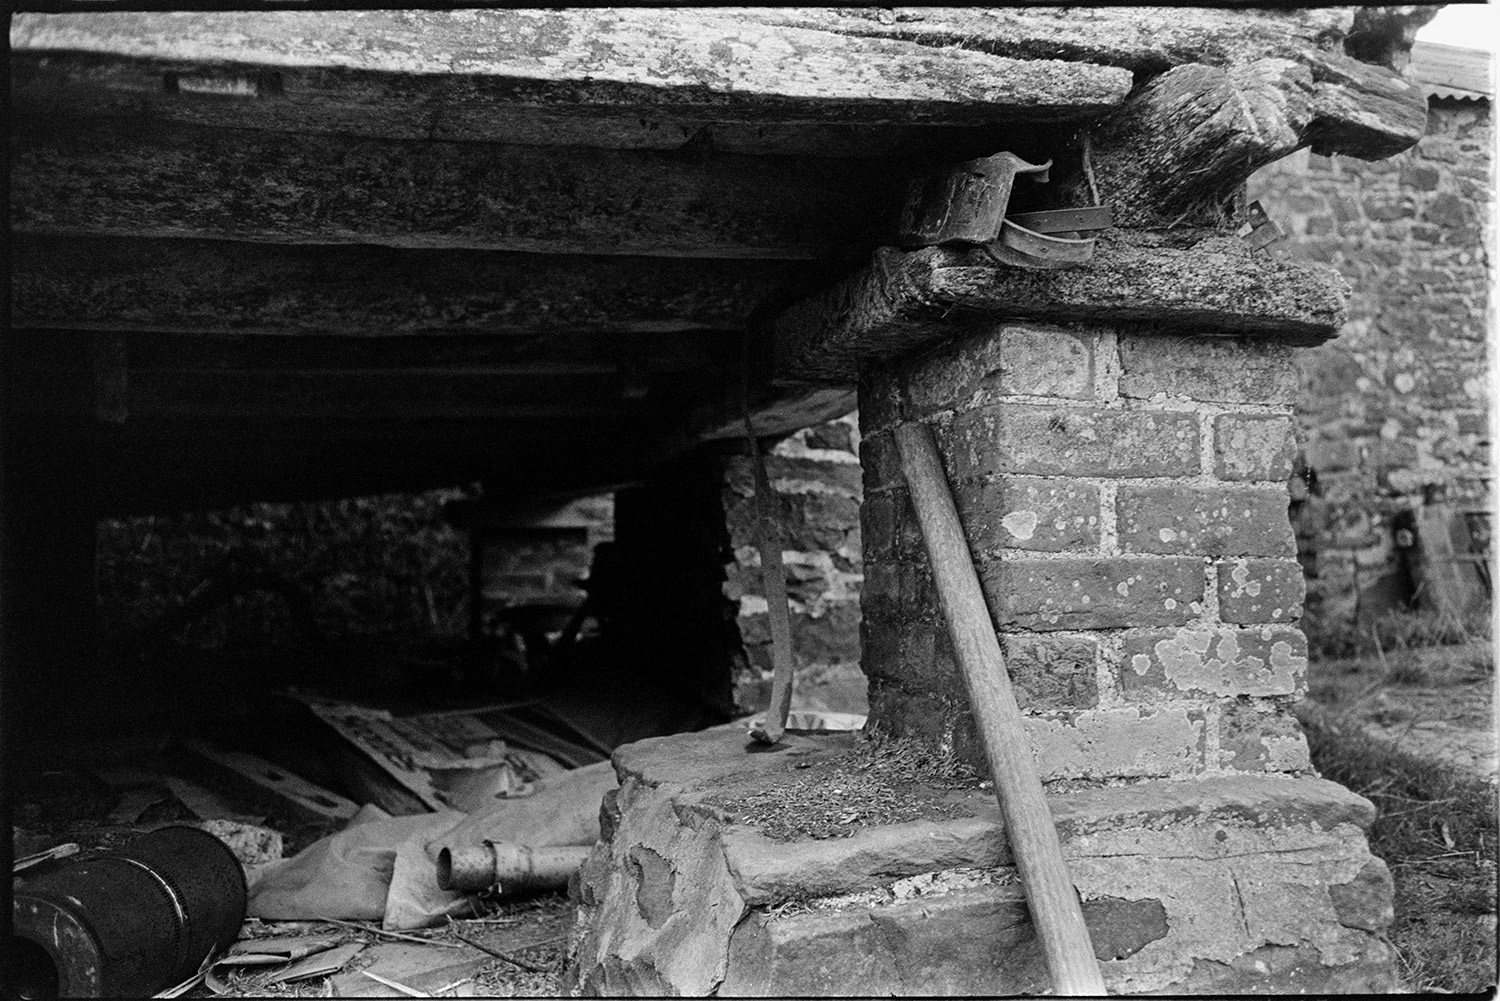 Details of granary, brickwork and roof construction. 
[A close up view of the brick pillars supporting a granary building in the farmyard at High House, Atherington.]